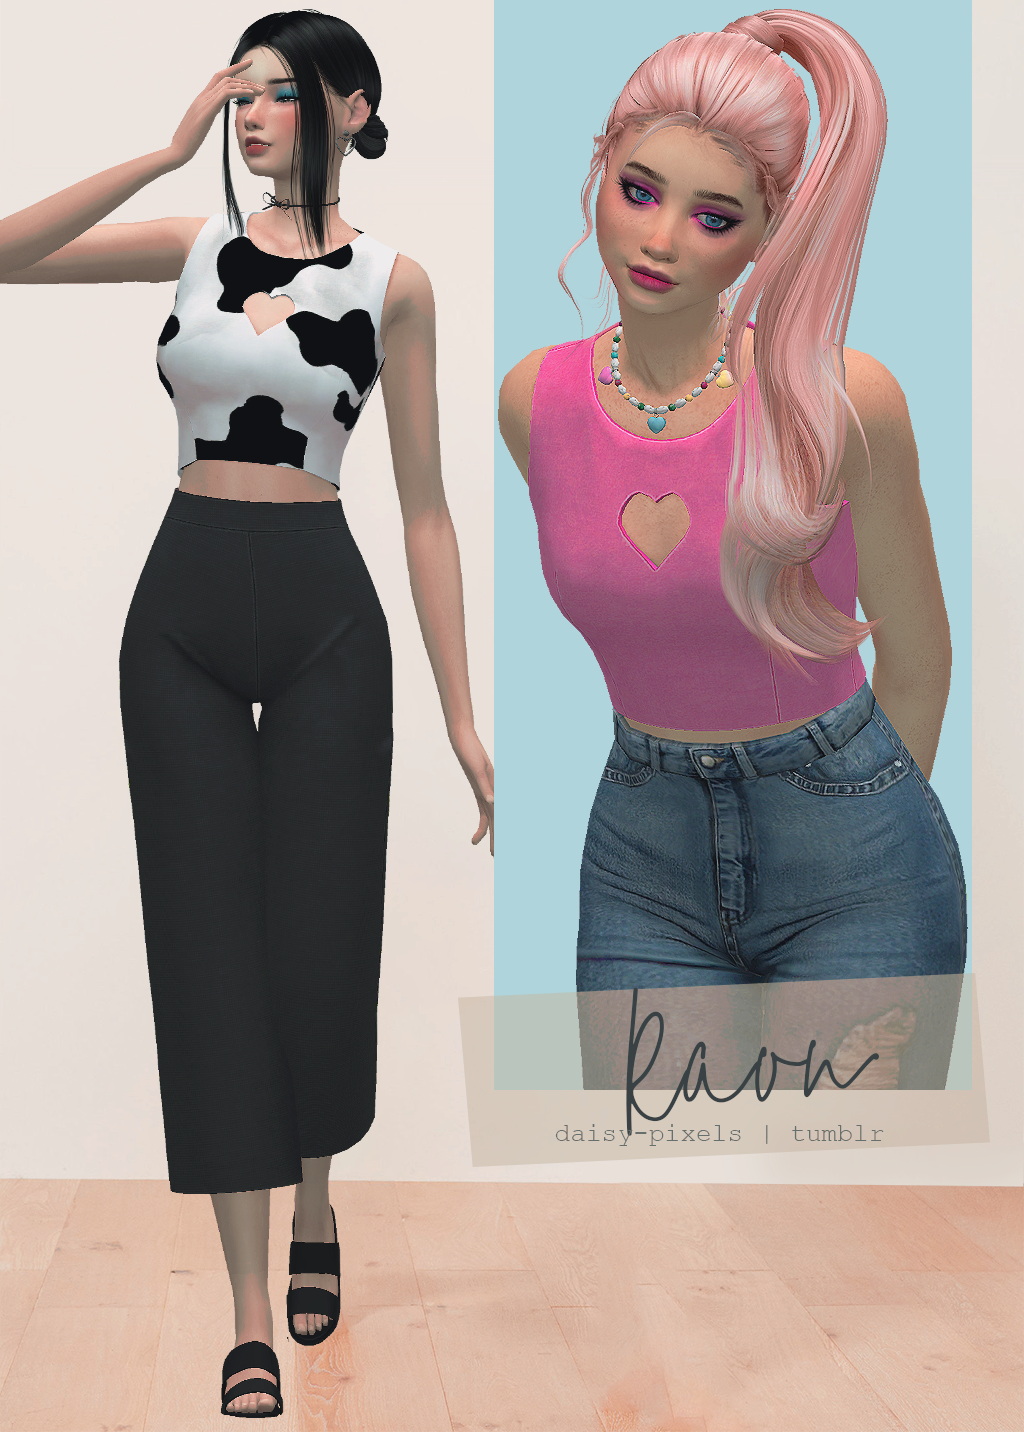 Sims 4 Female Clothing / Clothes CC - Sims 4 Updates Â» Page 28 of 4748